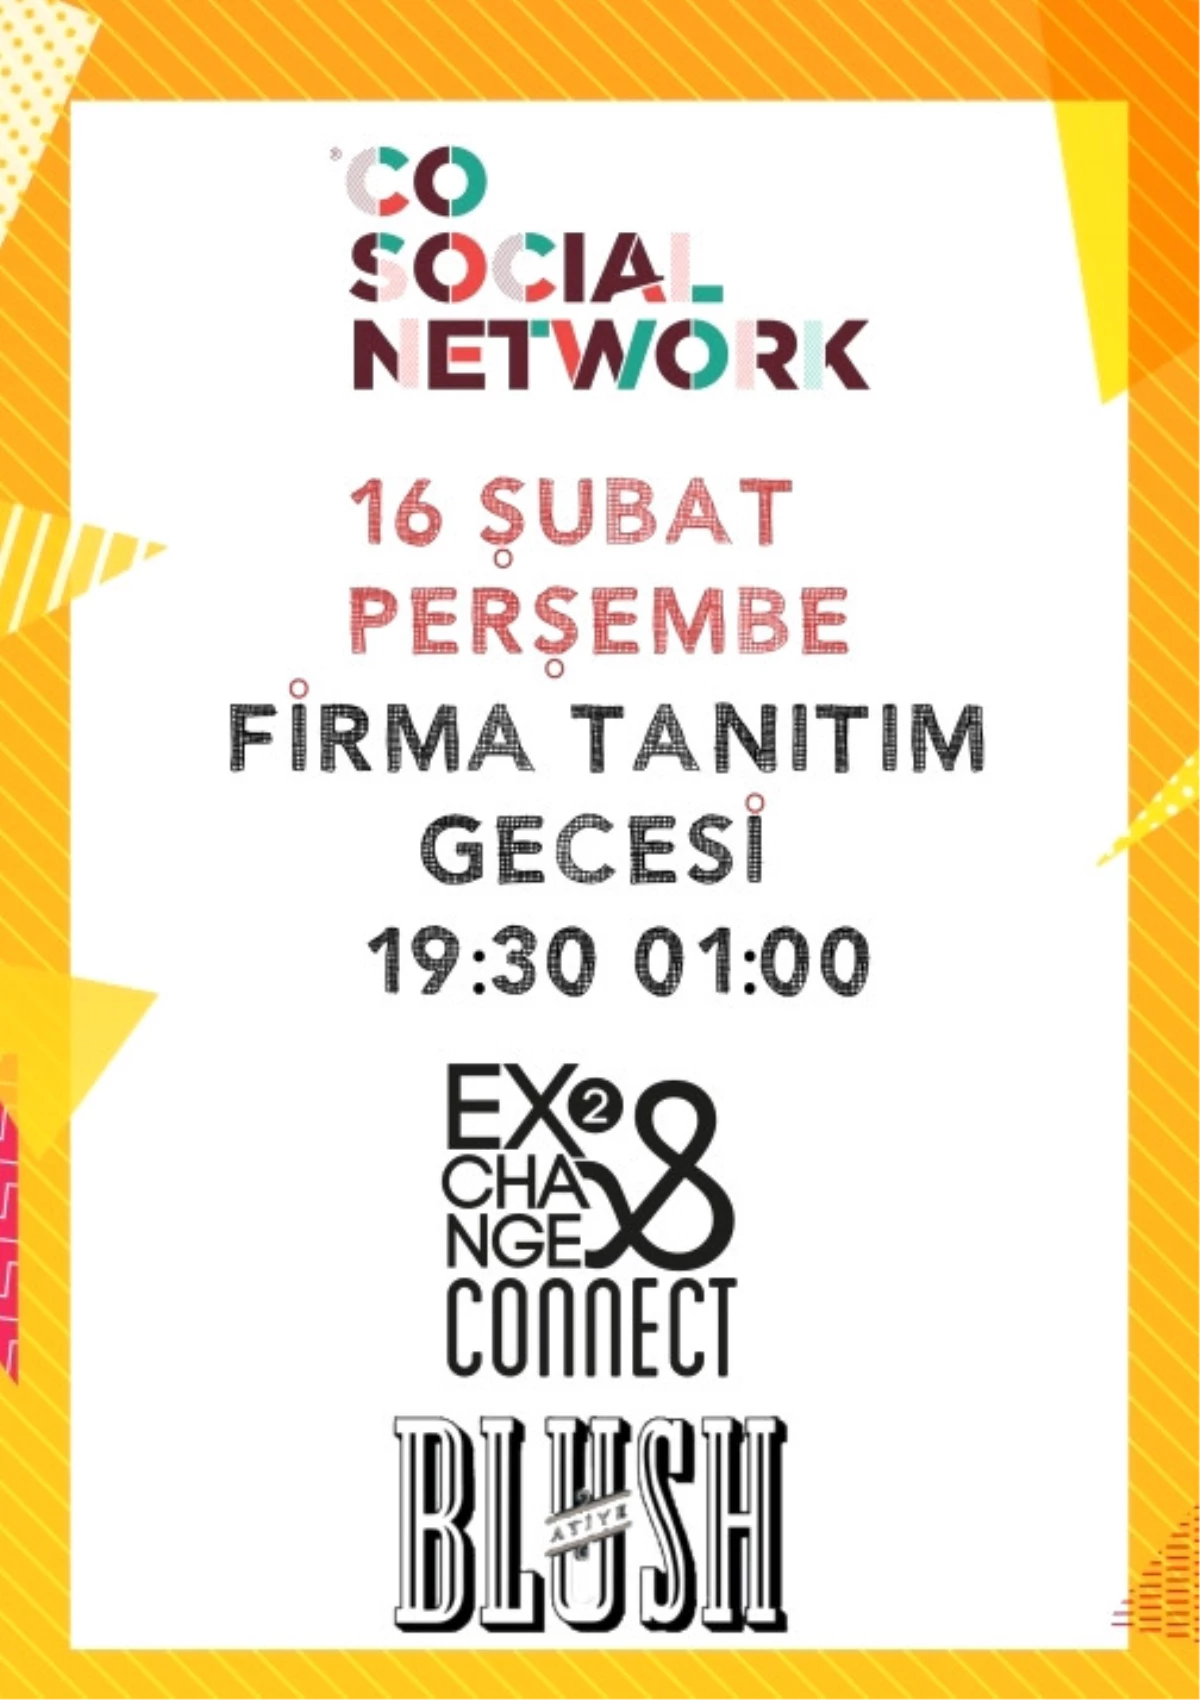 Cosocialnetwork Business Event